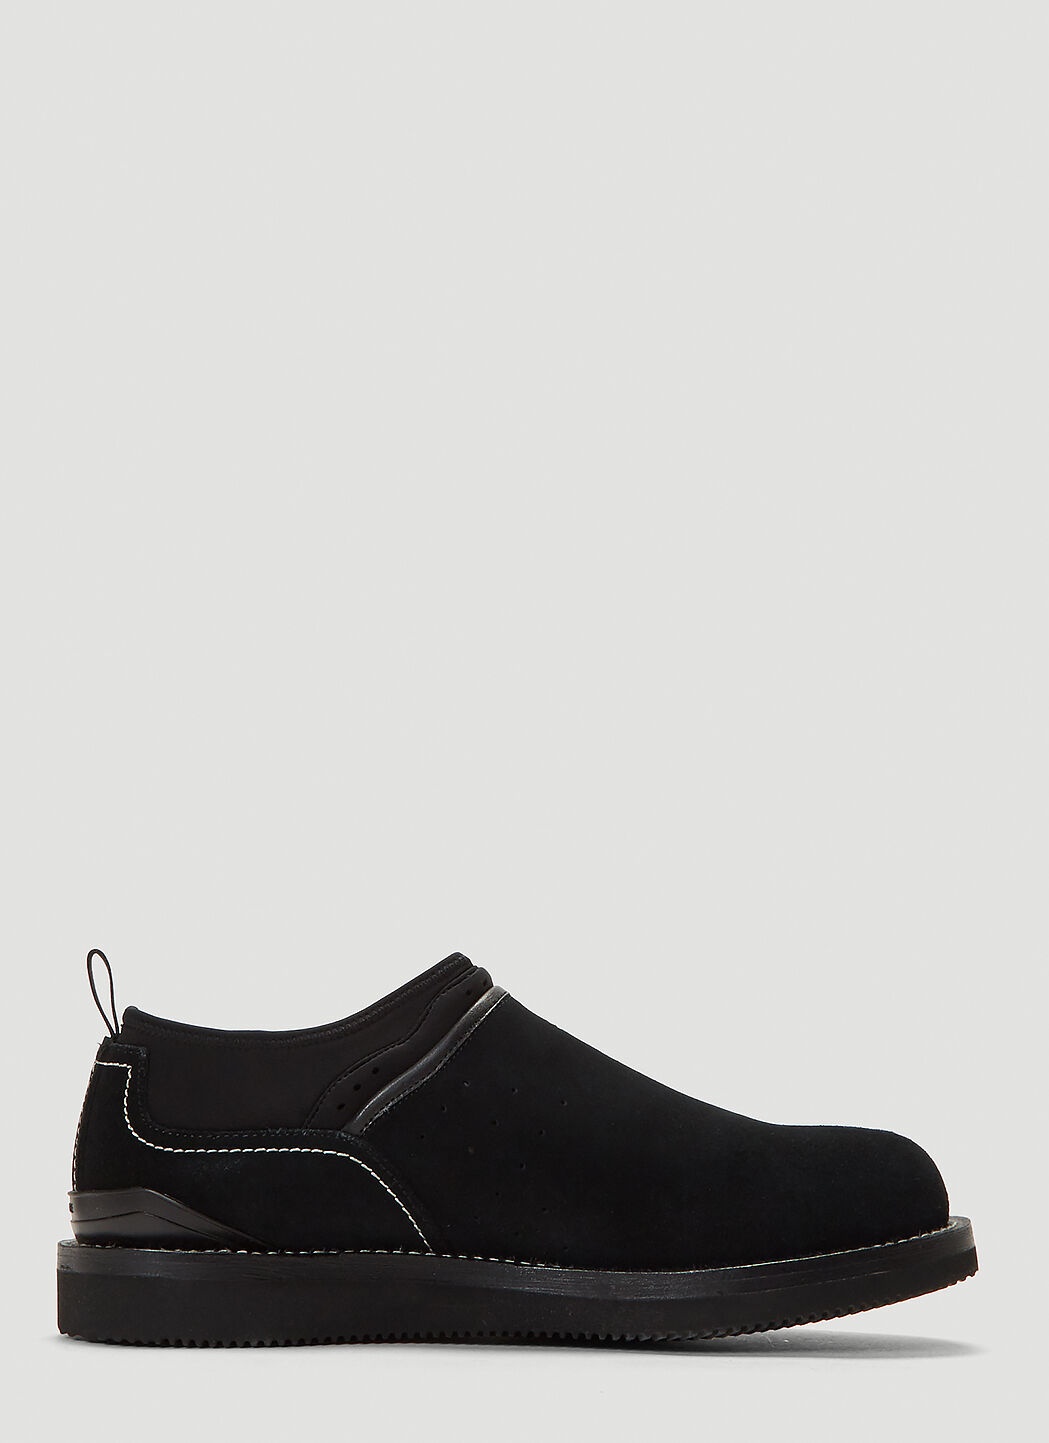 SGY03 Slip-On Ankle Boots - 1